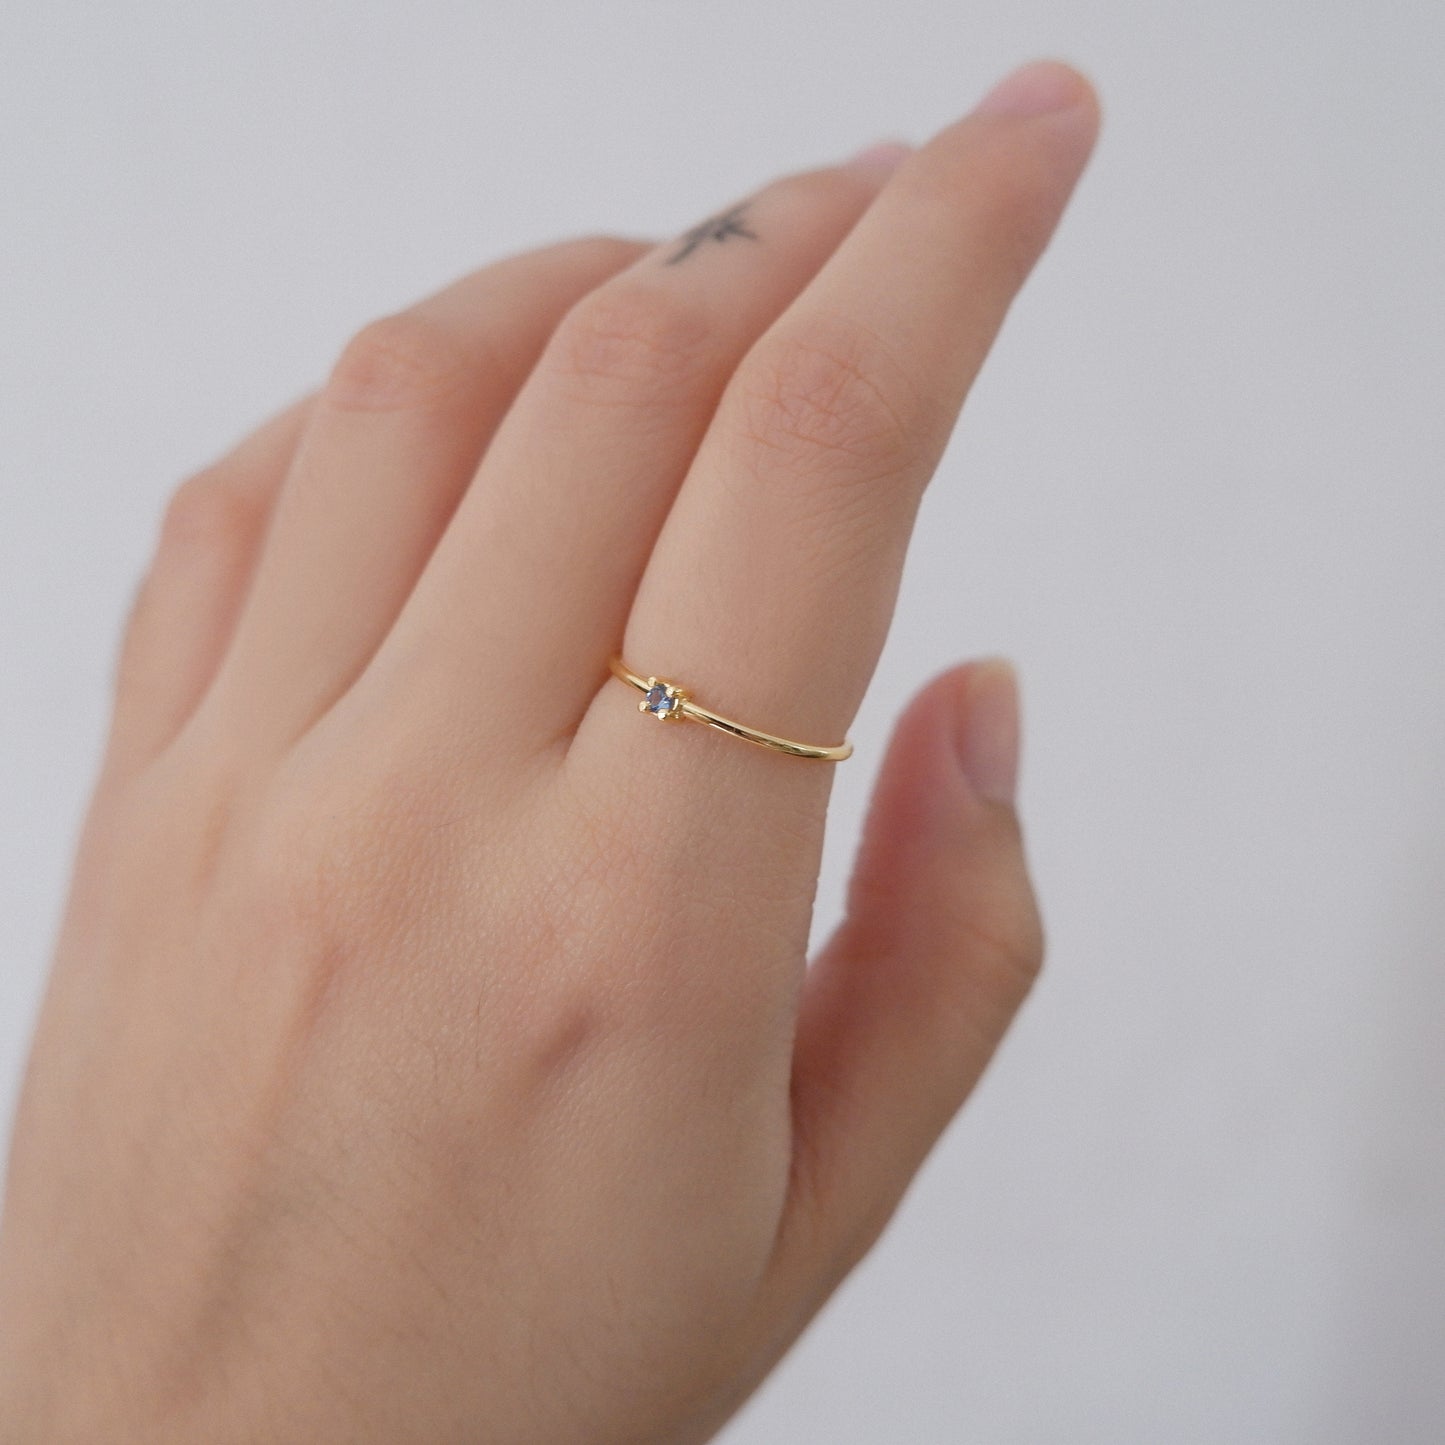 The Dainty Birthstone Ring in Solid Gold